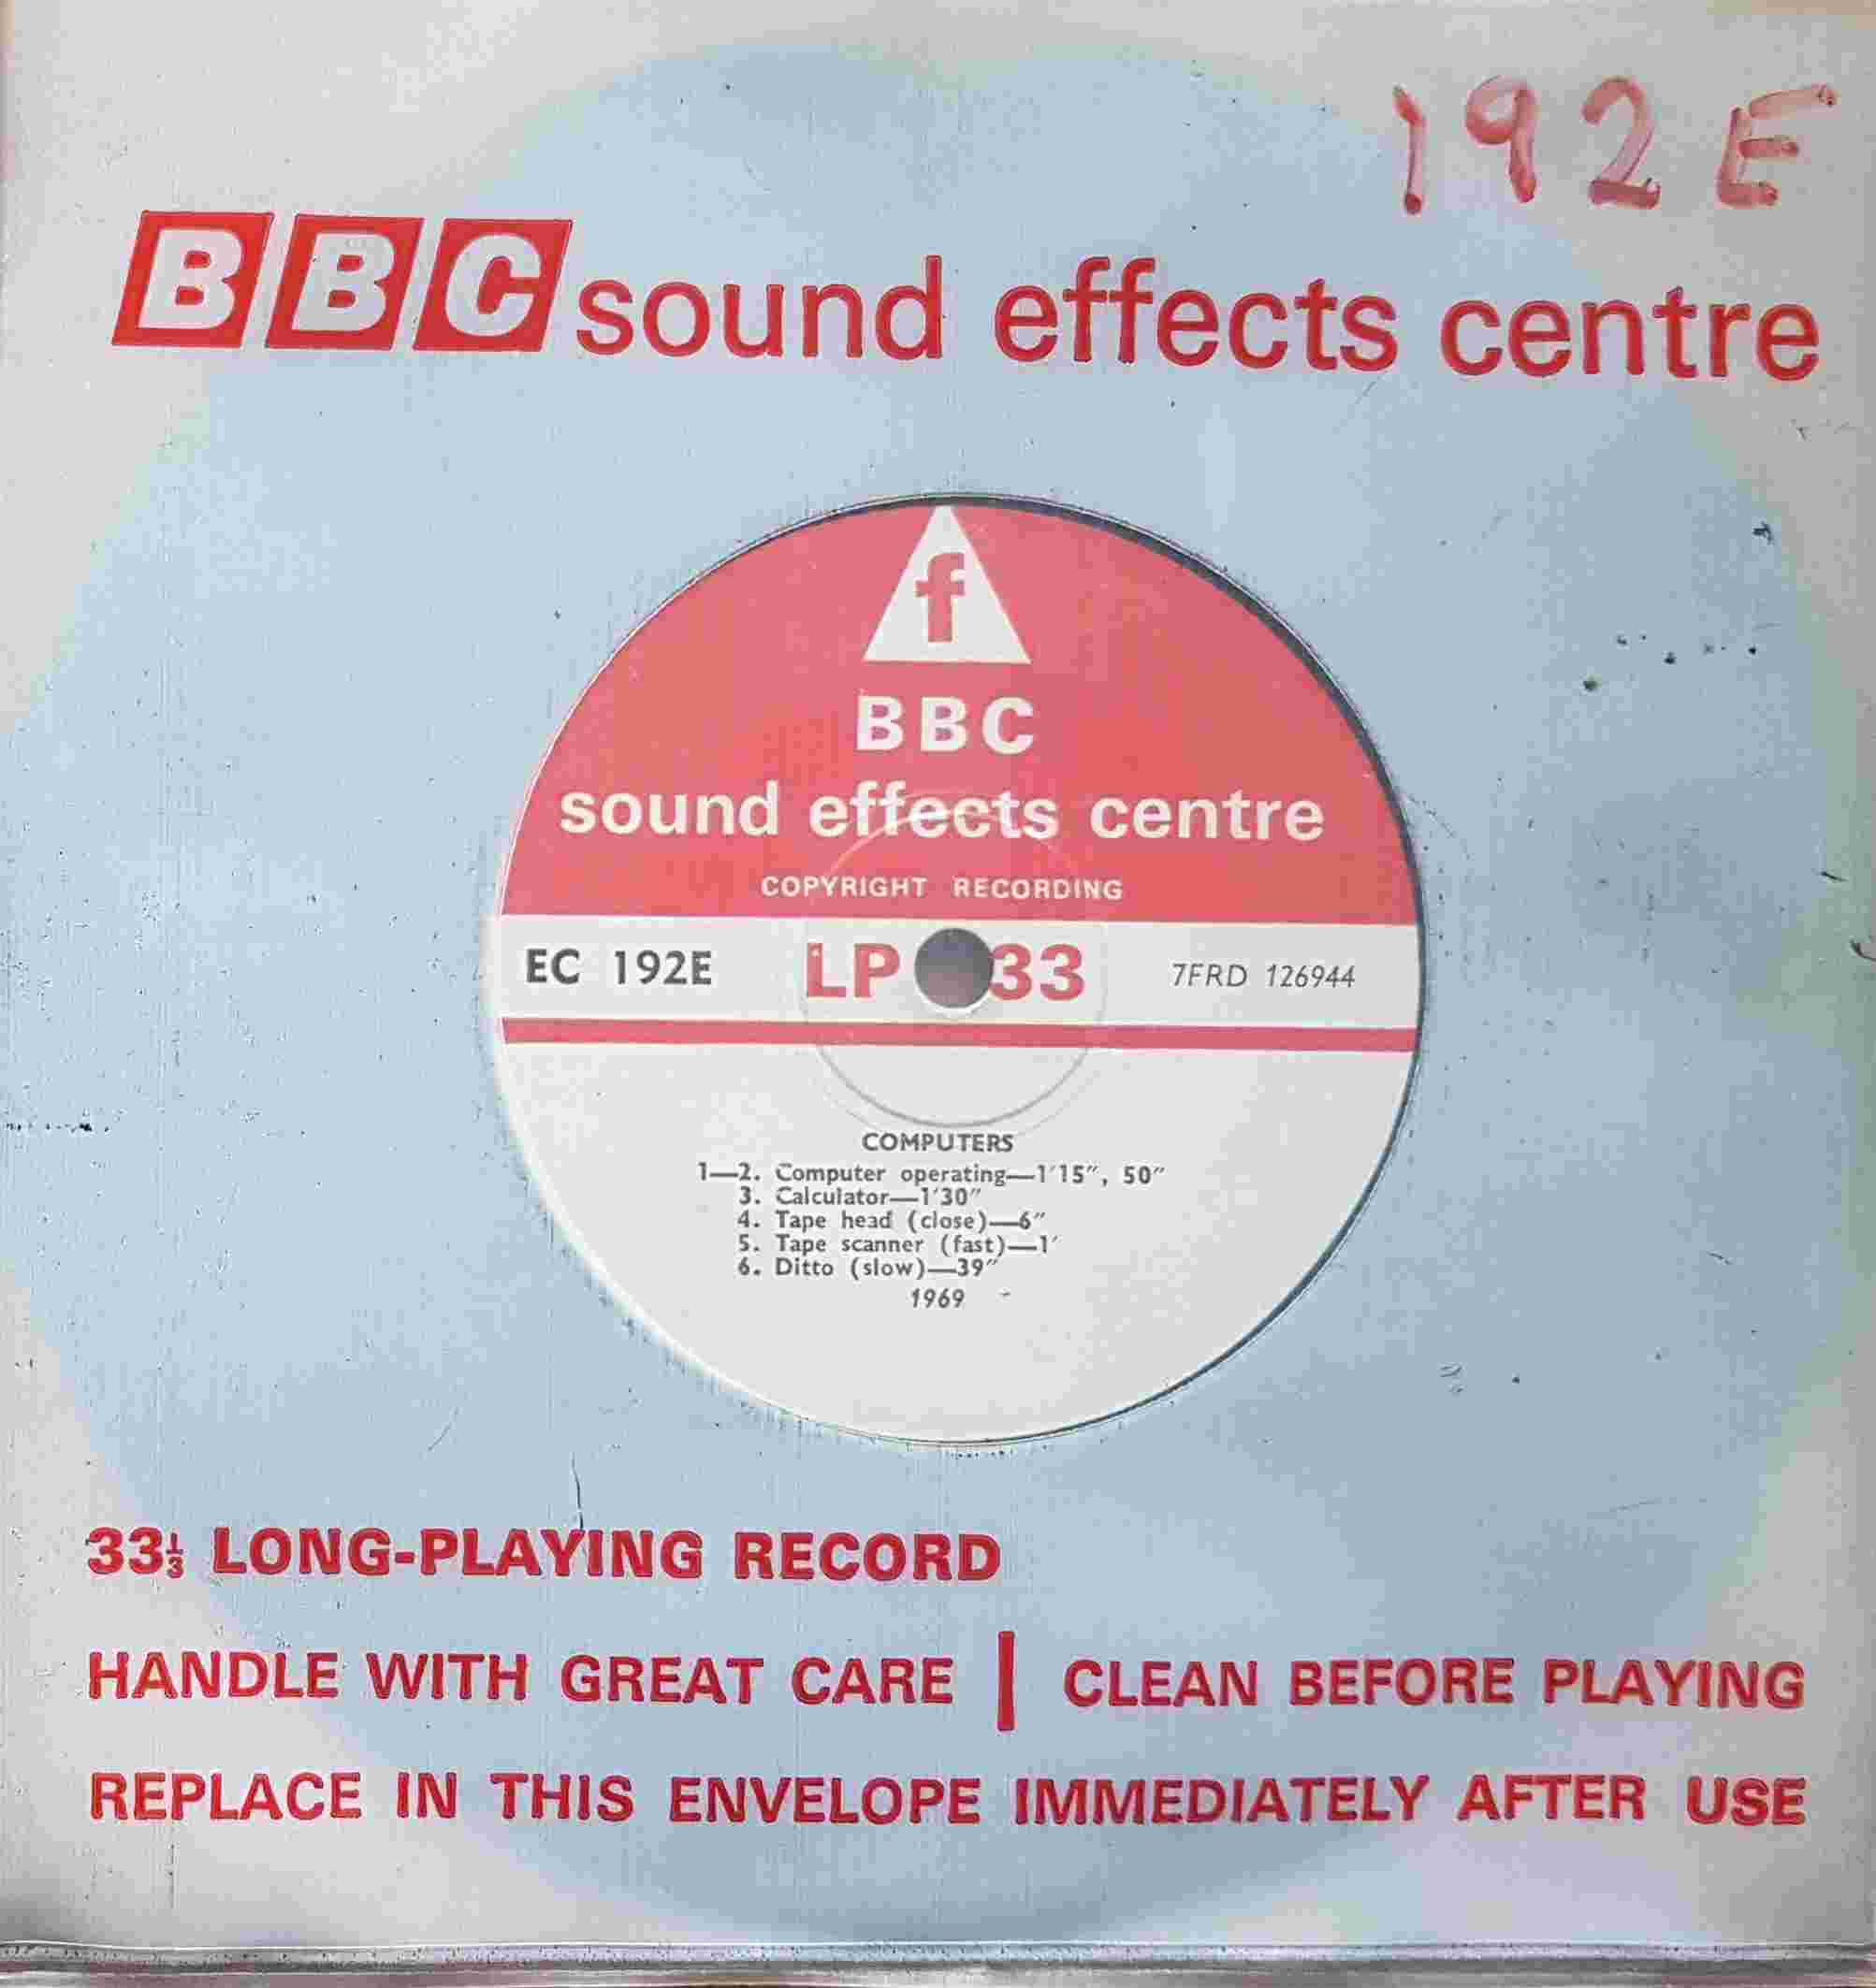 Picture of EC 192E Computers by artist Not registered from the BBC singles - Records and Tapes library